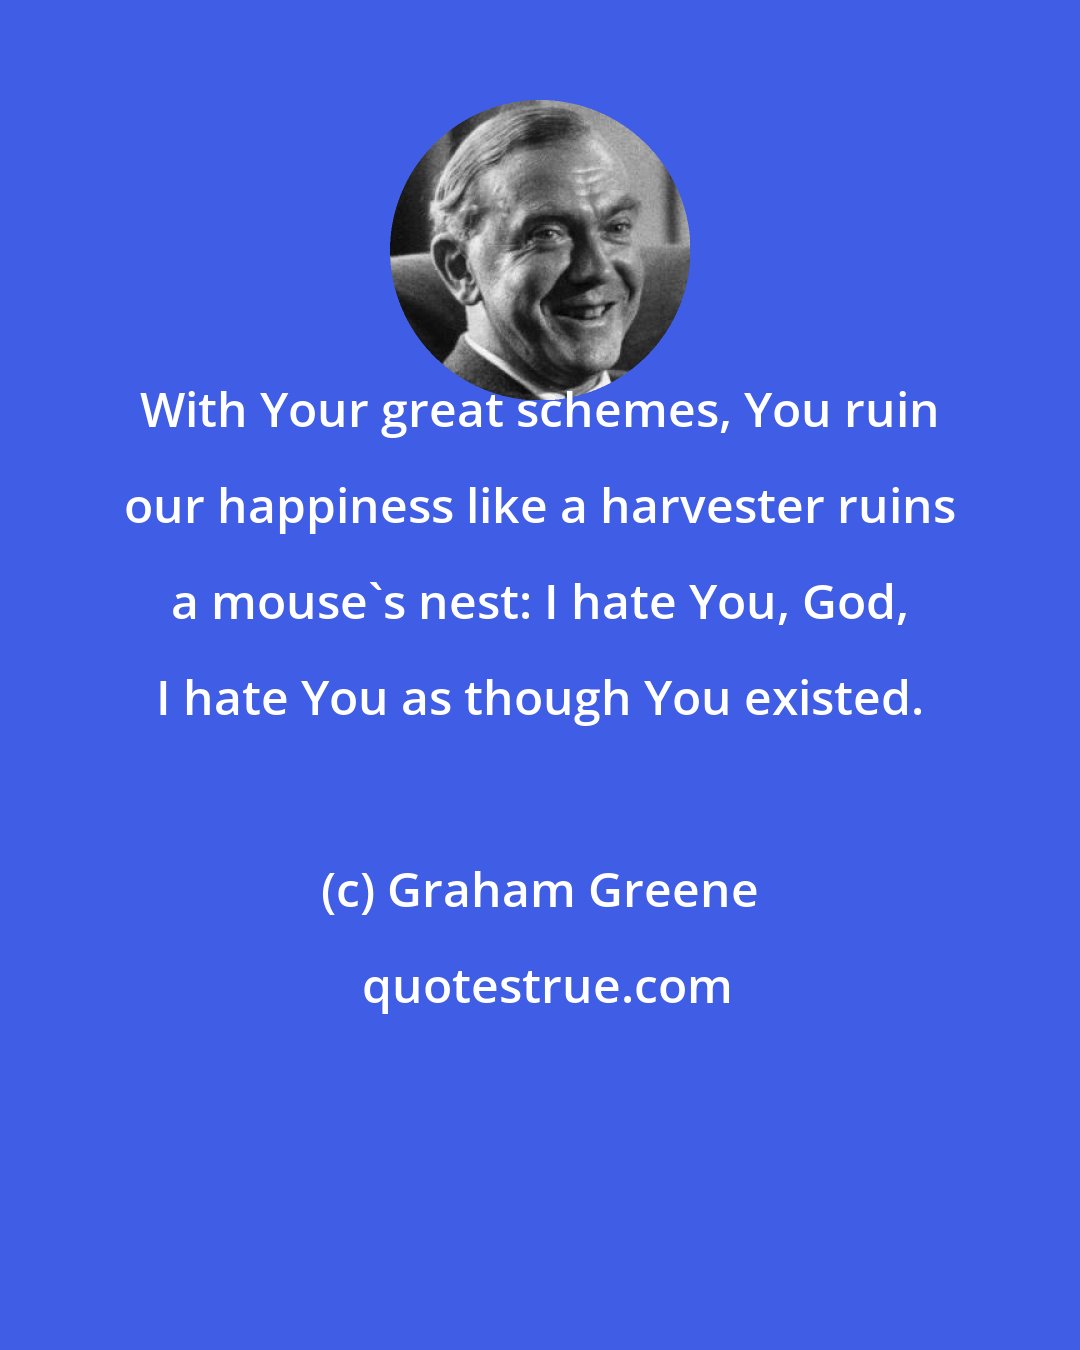 Graham Greene: With Your great schemes, You ruin our happiness like a harvester ruins a mouse's nest: I hate You, God, I hate You as though You existed.